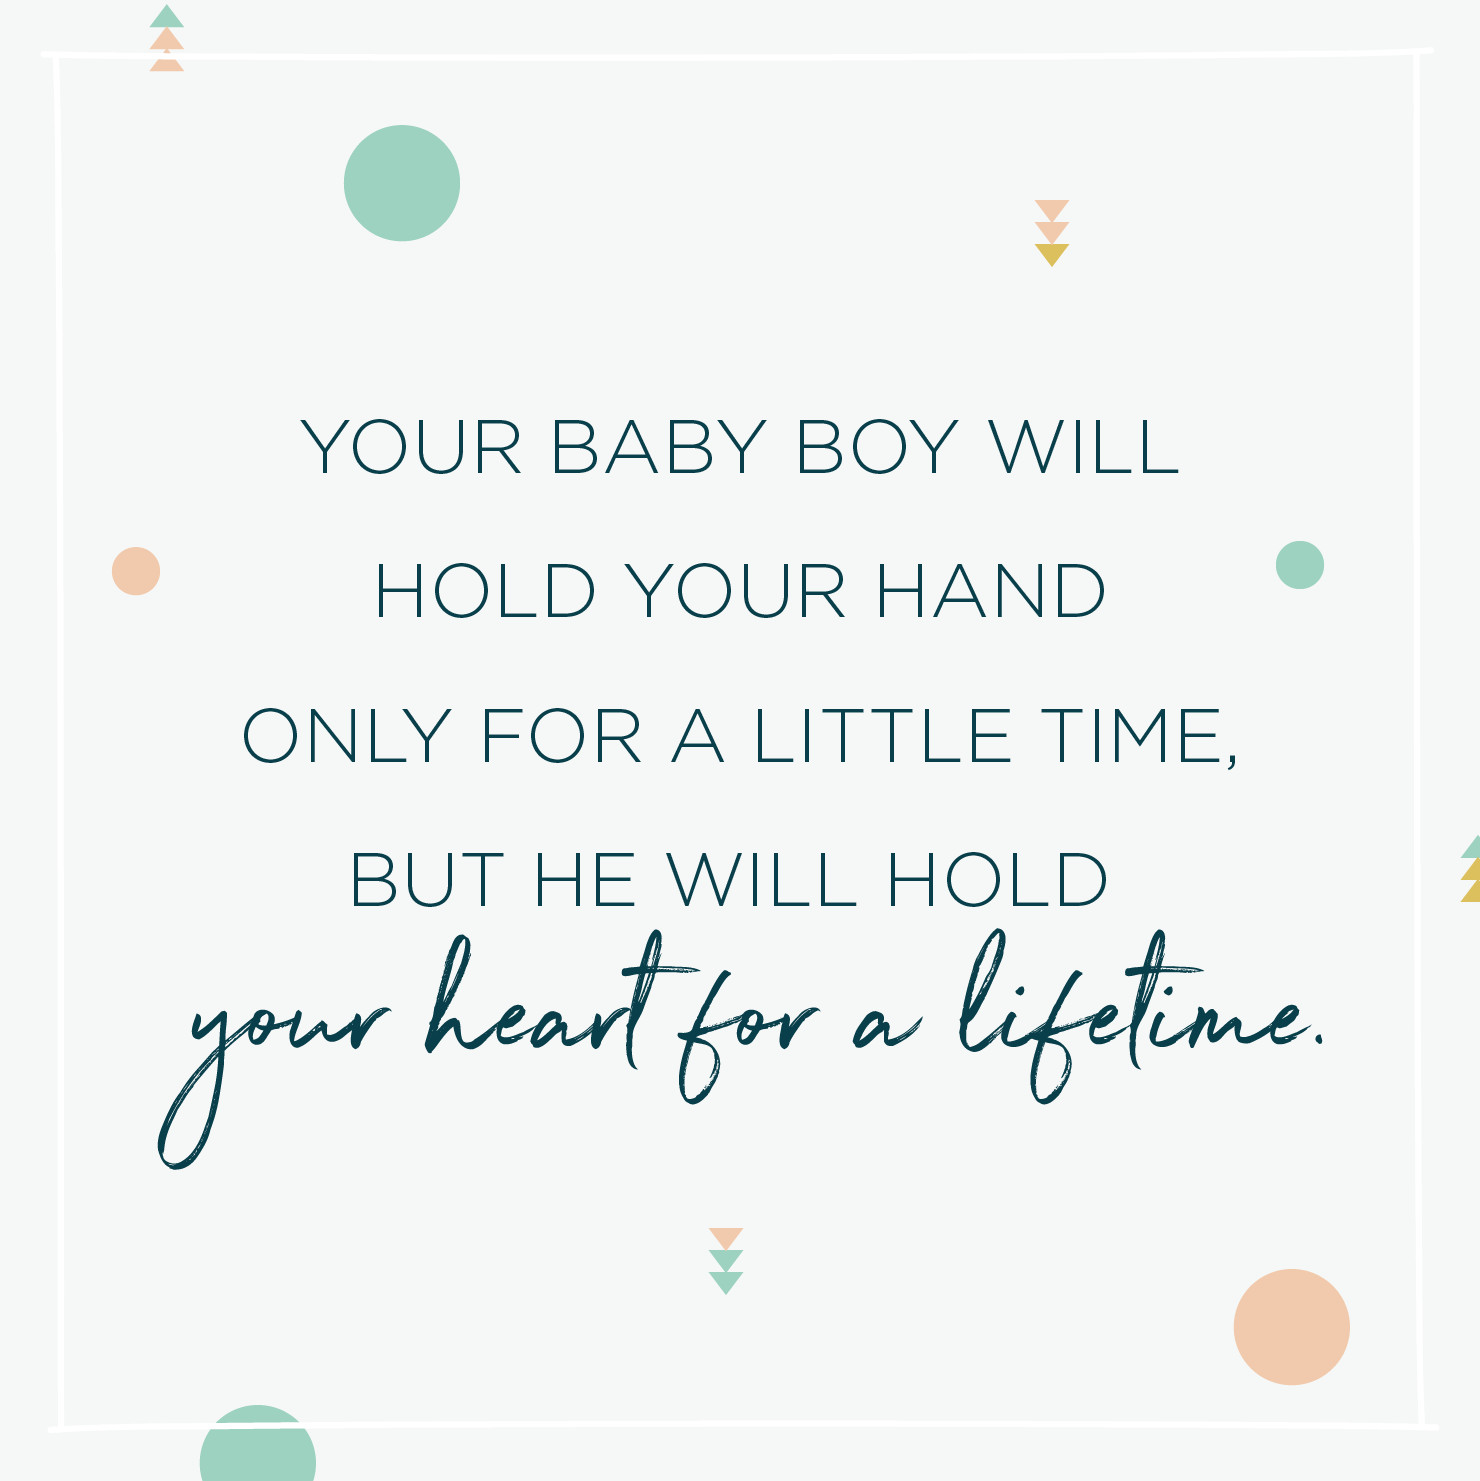 Quotes On Baby Boys
 84 Inspirational Baby Quotes and Sayings